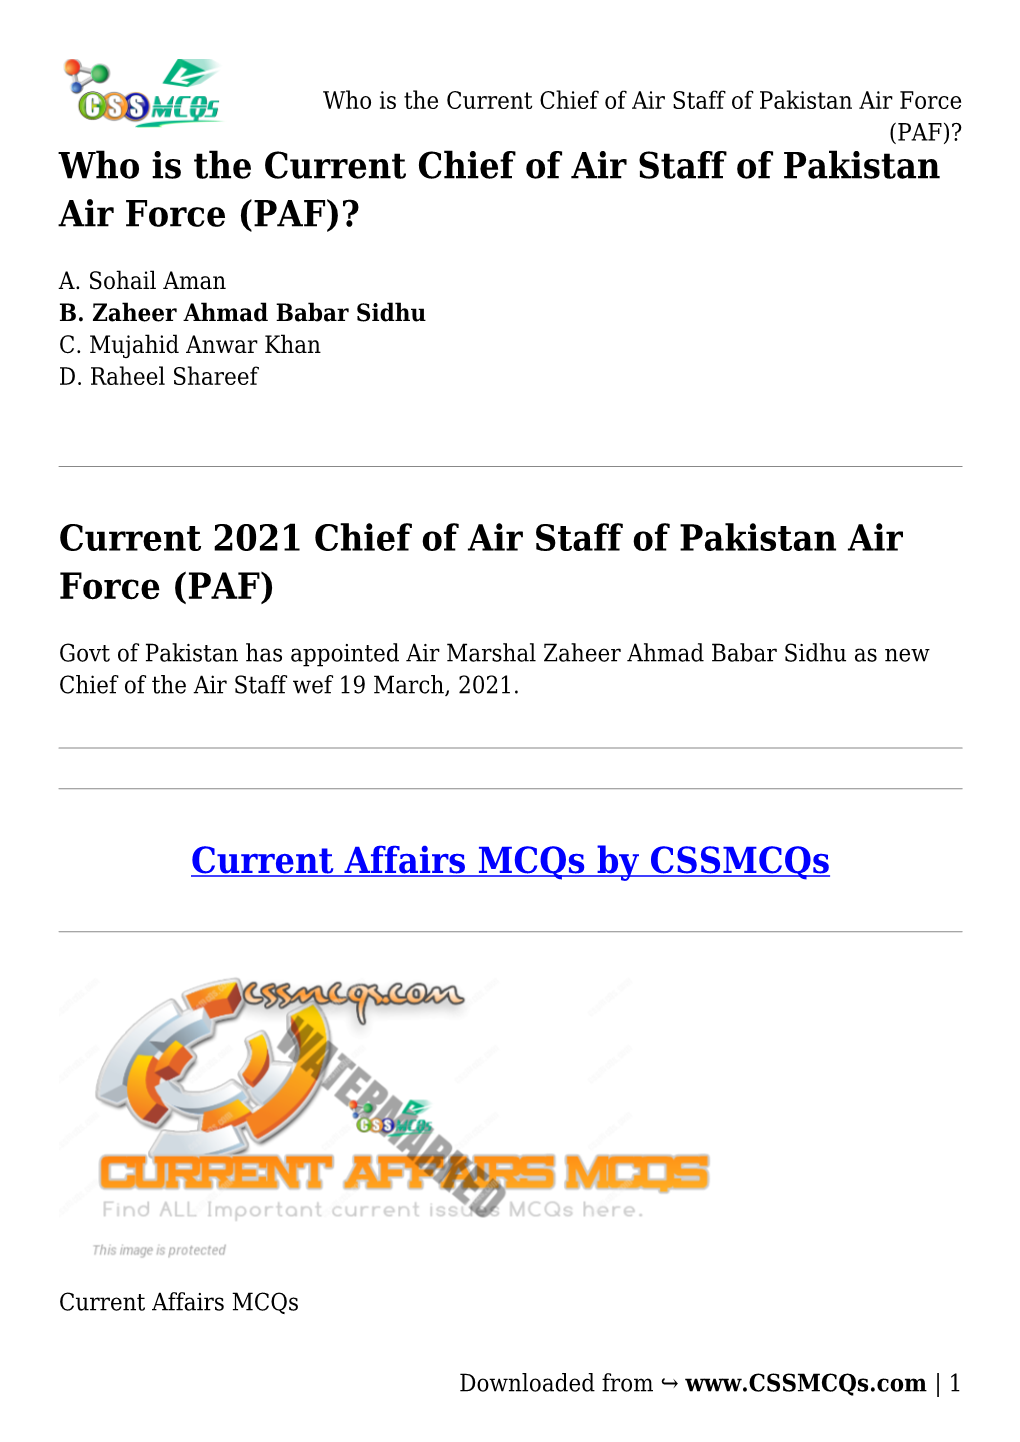 Who Is the Current Chief of Air Staff of Pakistan Air Force (PAF)? Who Is the Current Chief of Air Staff of Pakistan Air Force (PAF)?